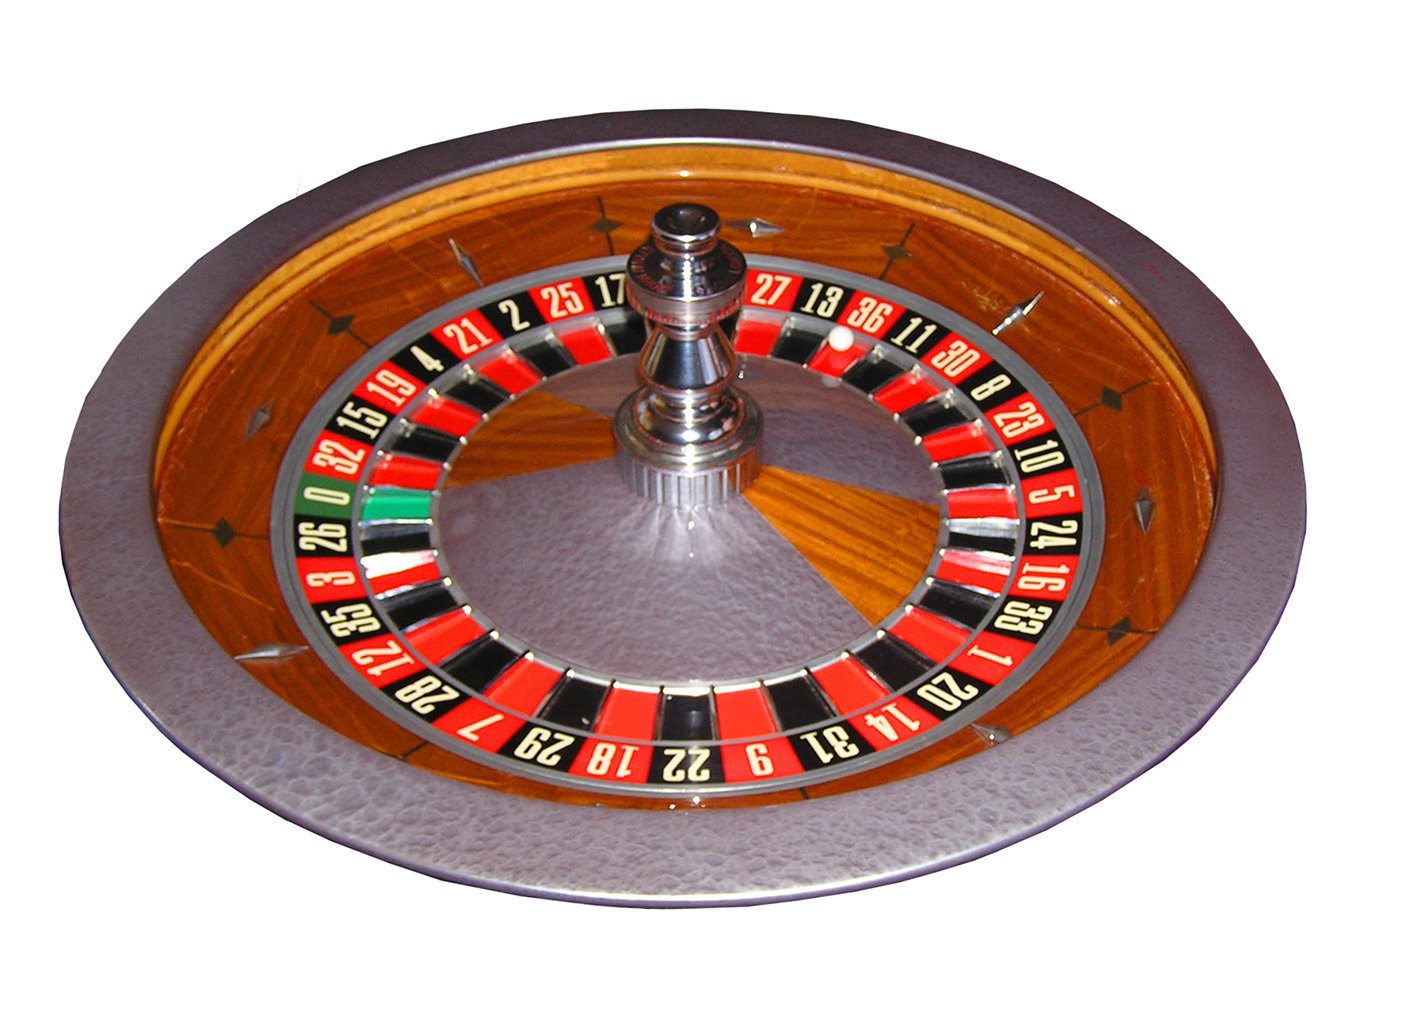 Roulette if it lands on green bay